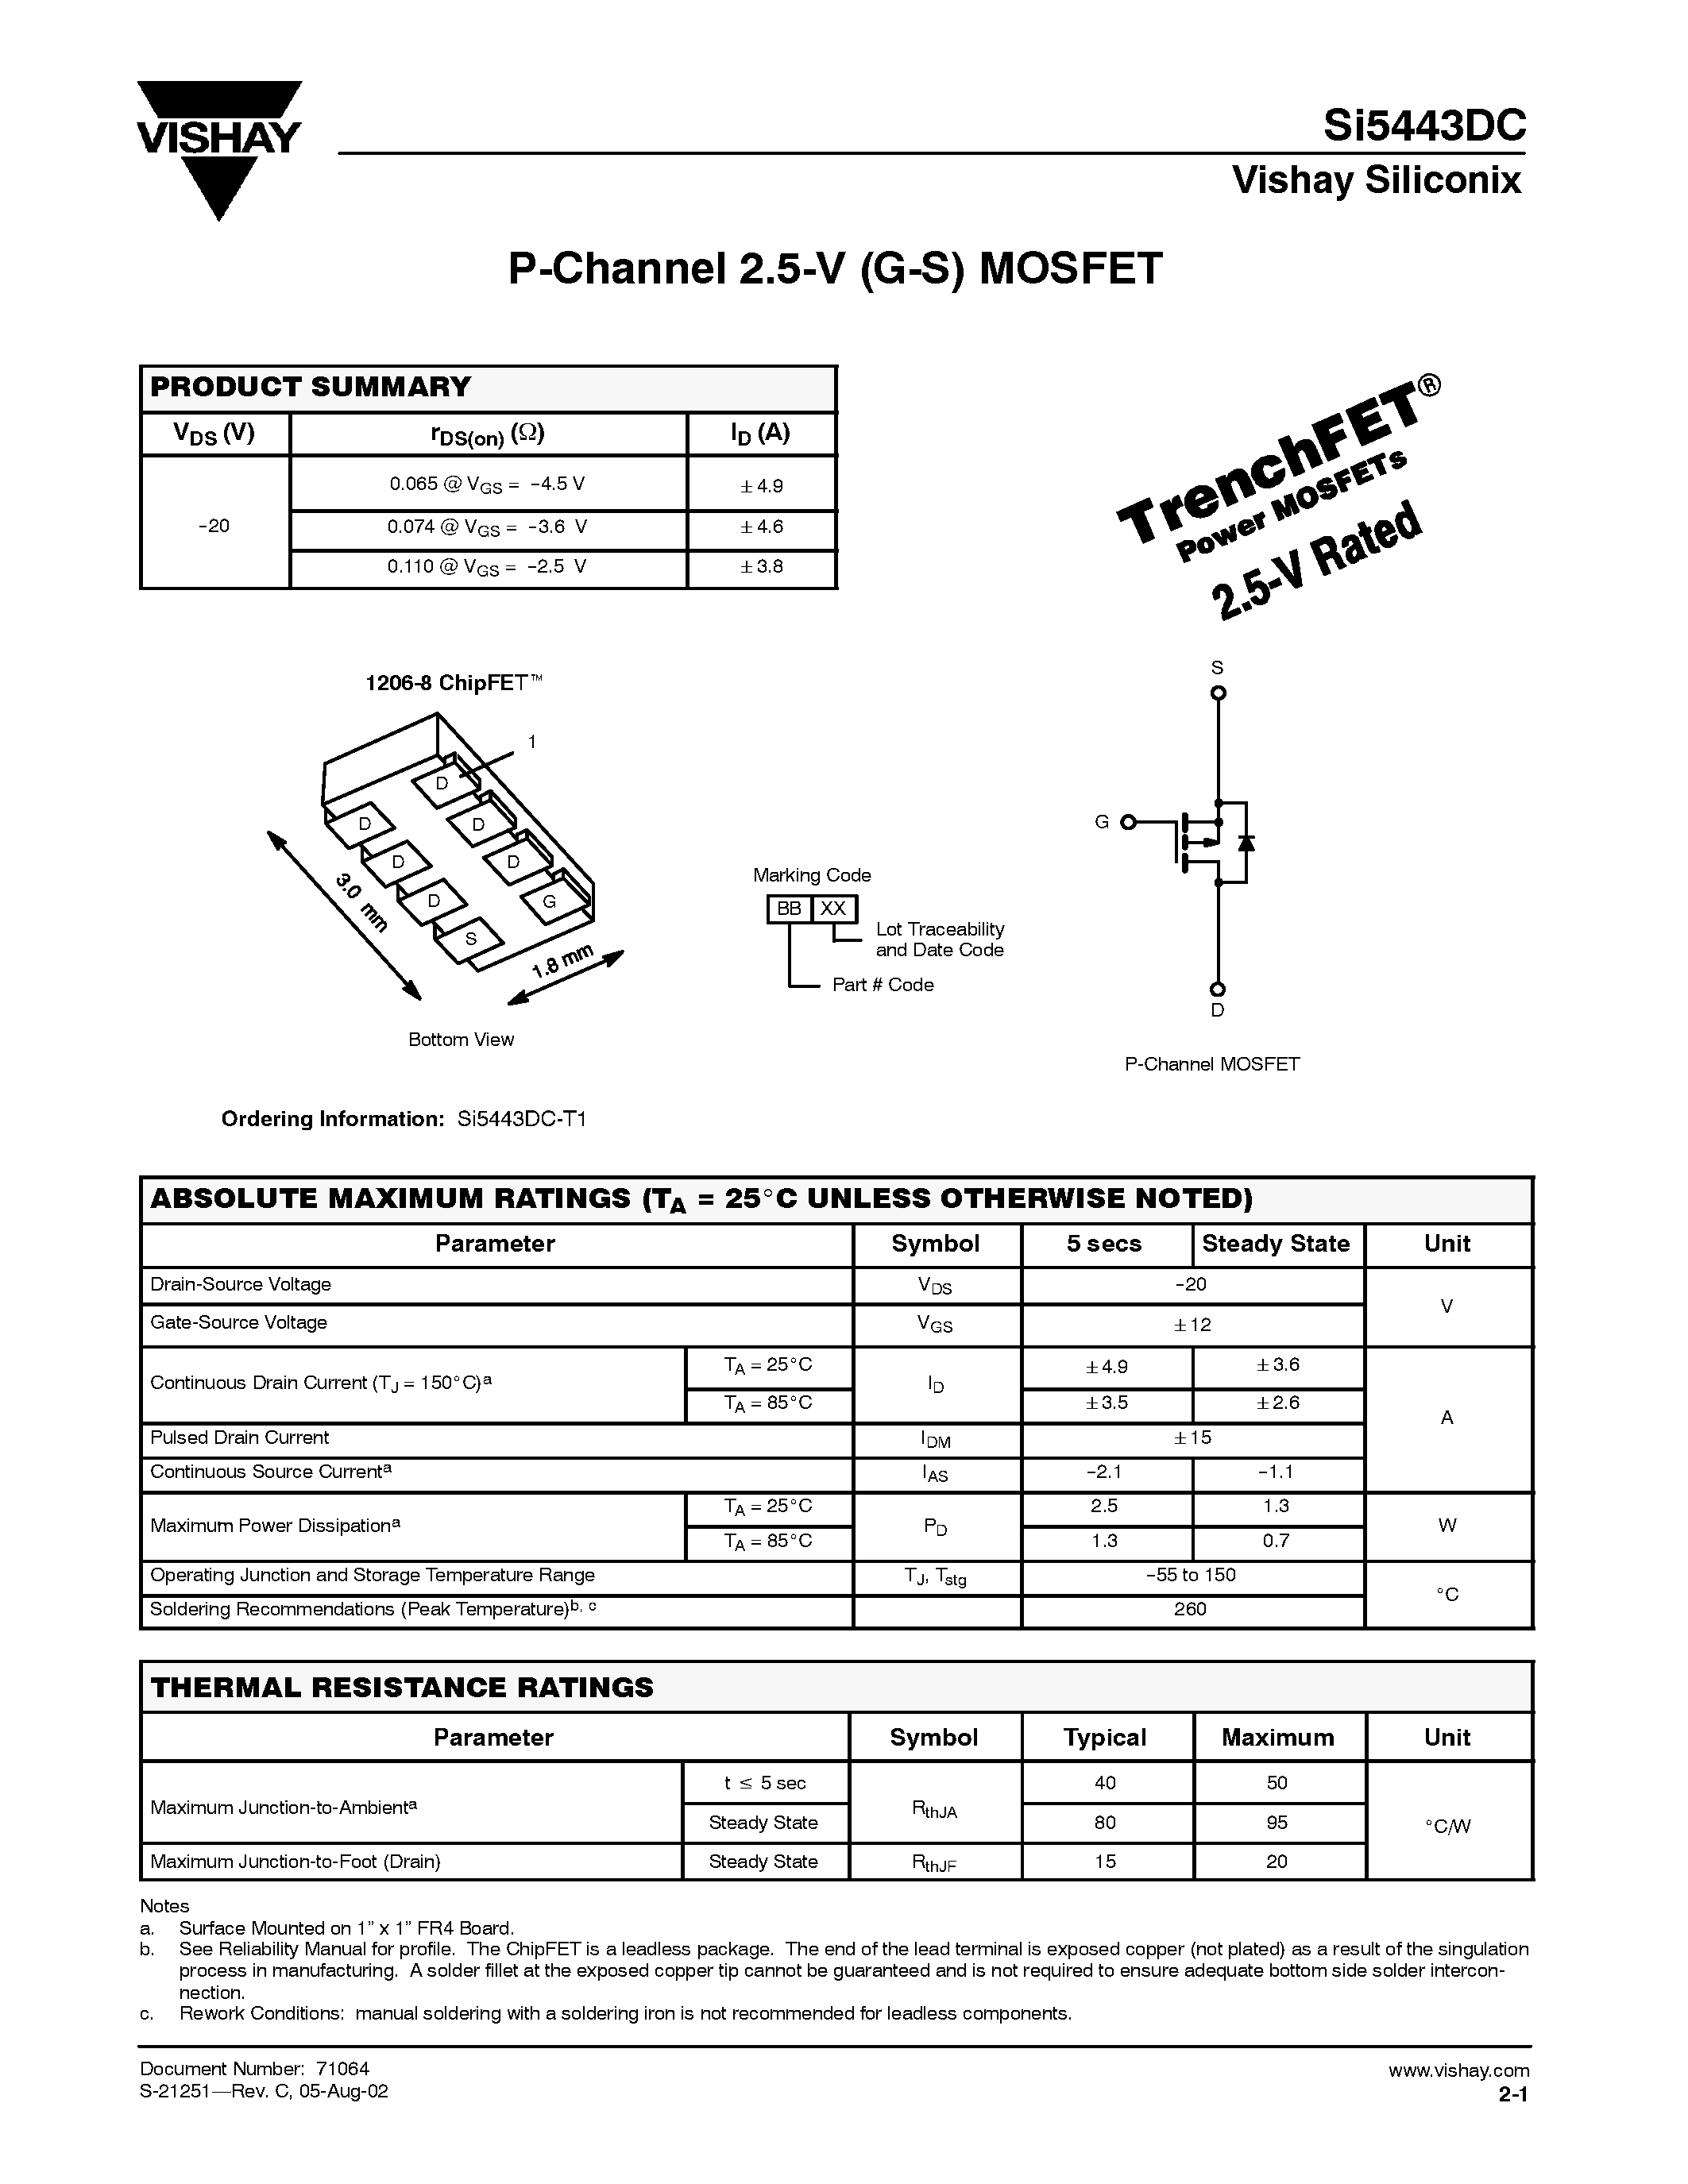 Даташит SI5443DC - P-Channel 2.5-V (G-S) MOSFET страница 1